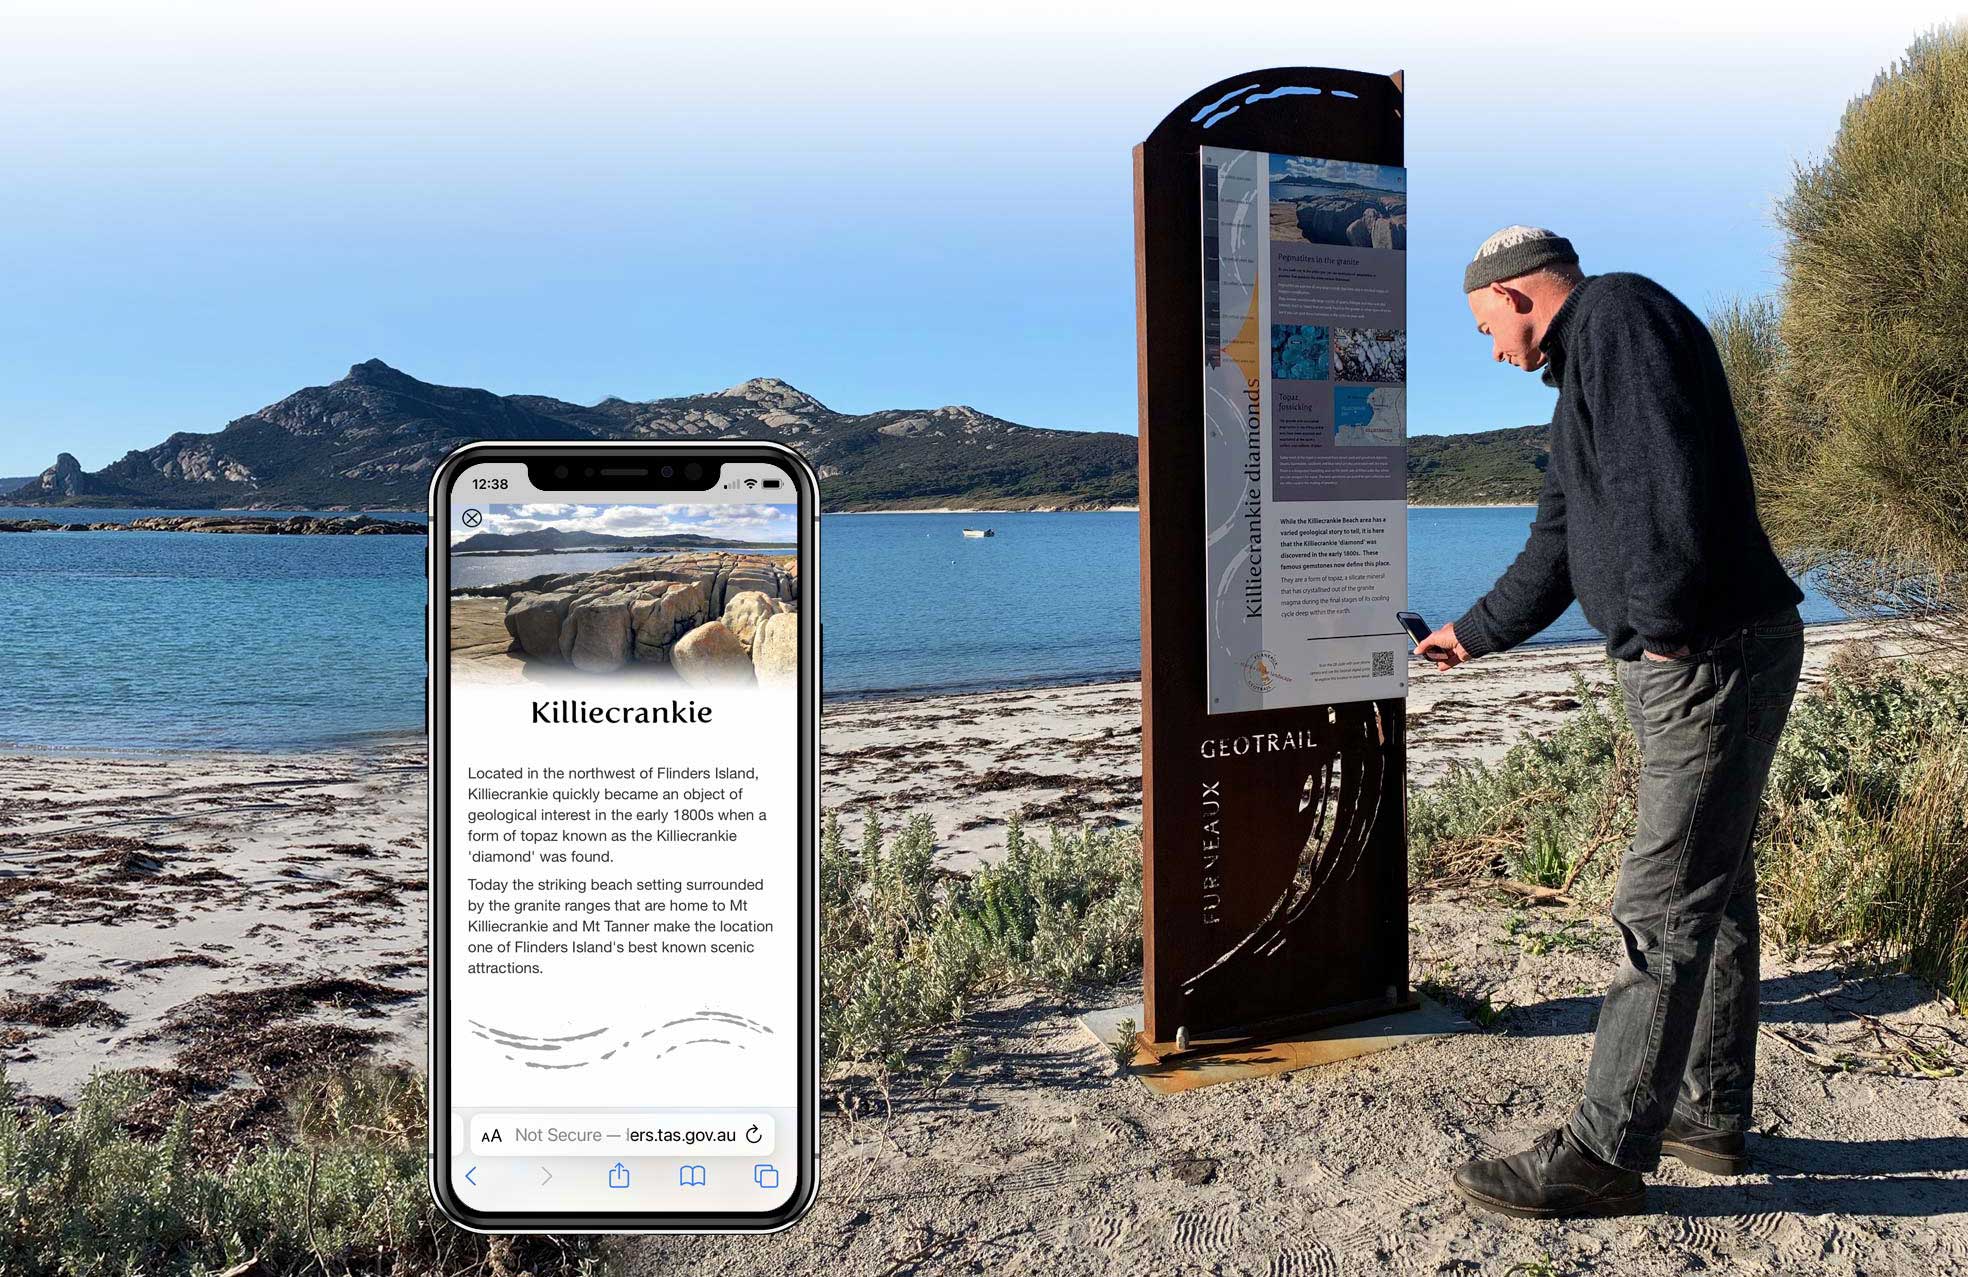 Signage on the Furneaux Geotrail at Flinders Island is supported by custom web app pages publishing the sign content in HTML 